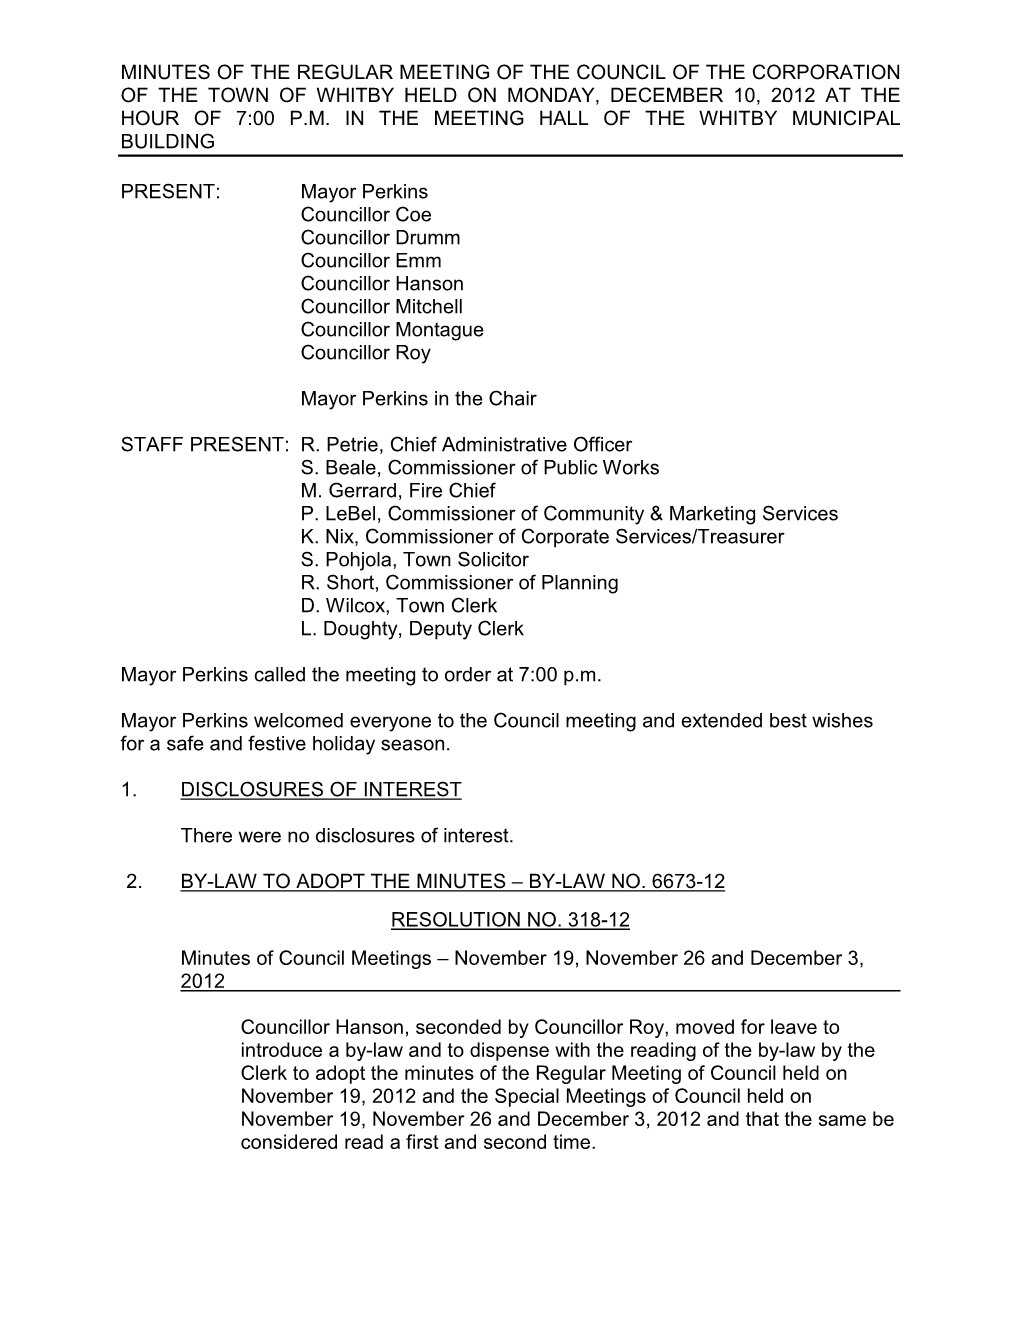 Minutes of the Regular Meeting of the Council of the Corporation of the Town of Whitby Held on Monday, December 10, 2012 at the Hour of 7:00 P.M